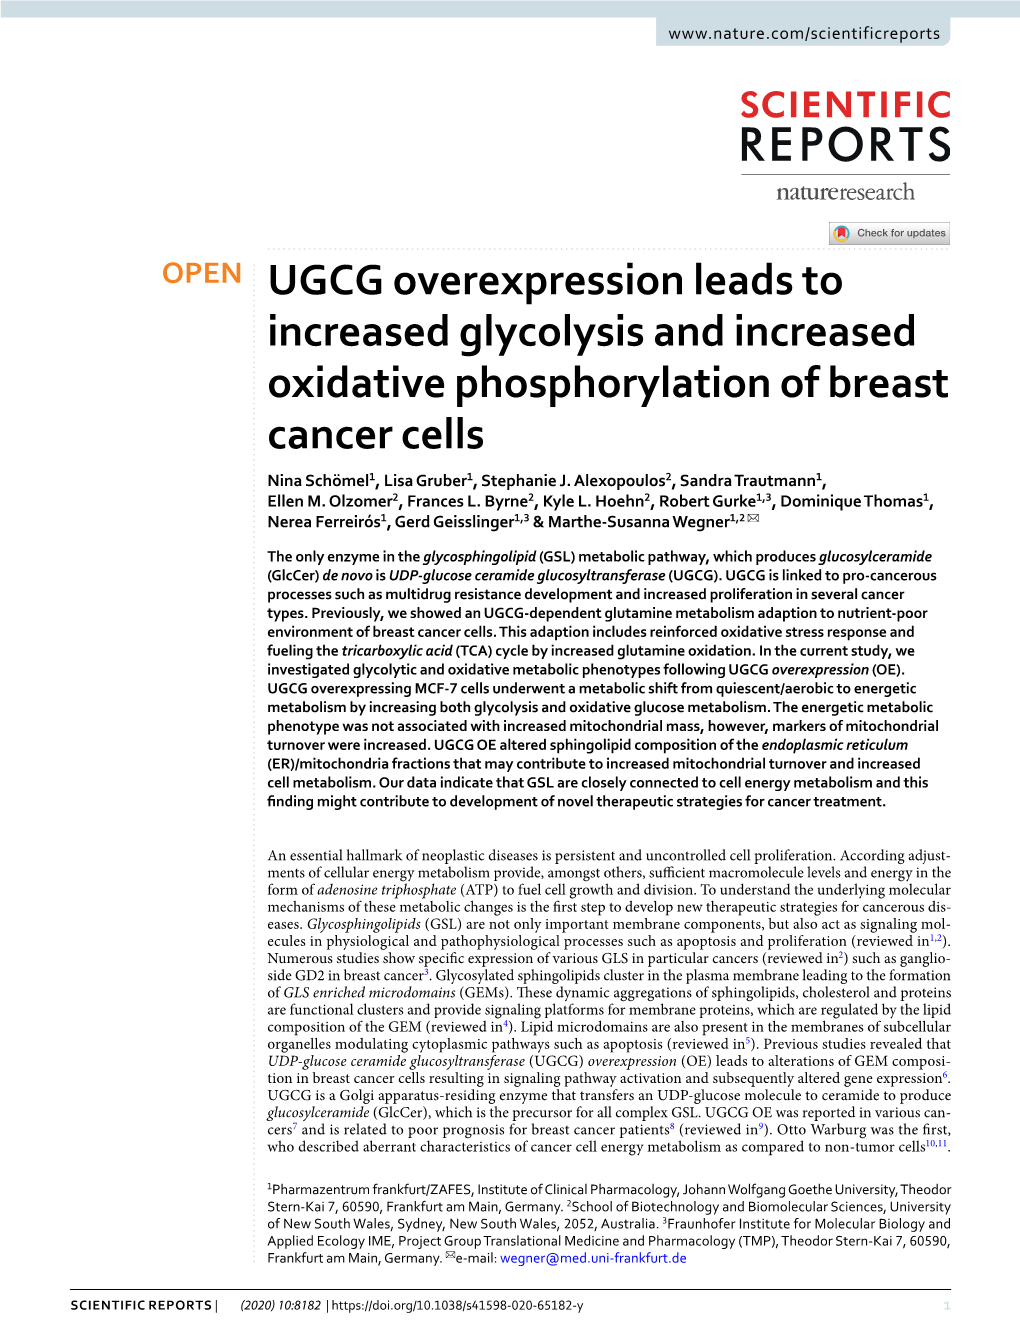 UGCG Overexpression Leads to Increased Glycolysis and Increased Oxidative Phosphorylation of Breast Cancer Cells Nina Schömel1, Lisa Gruber1, Stephanie J